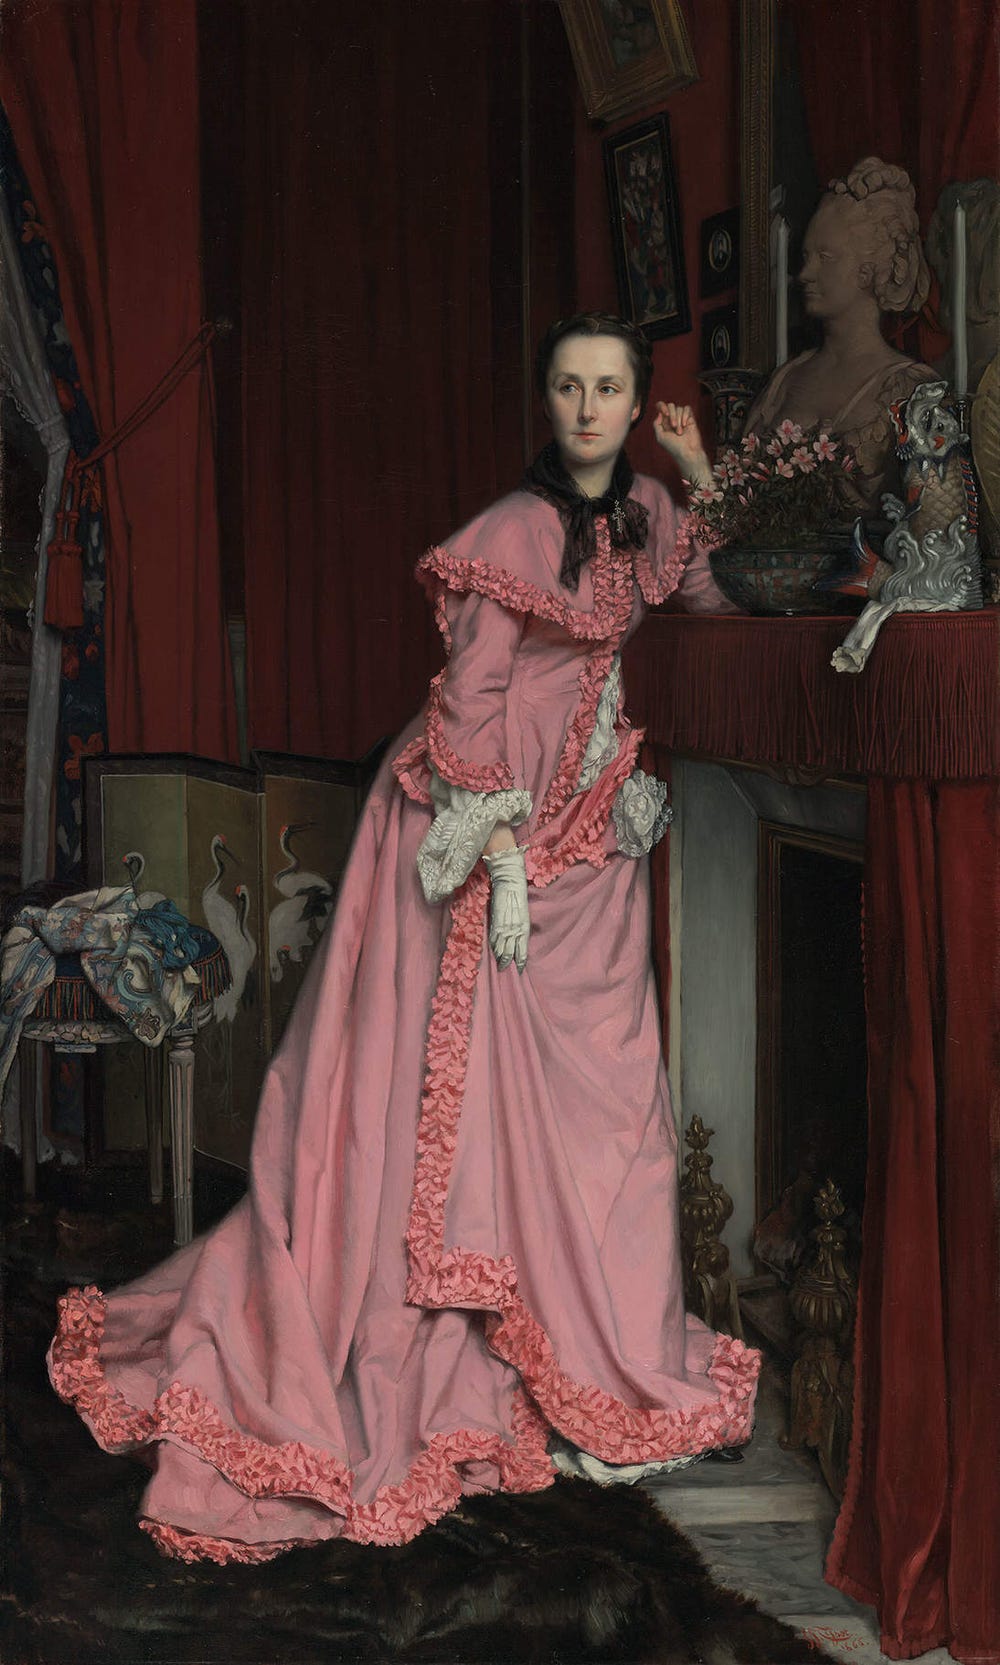 Woman wearing a pink dress and white gloves